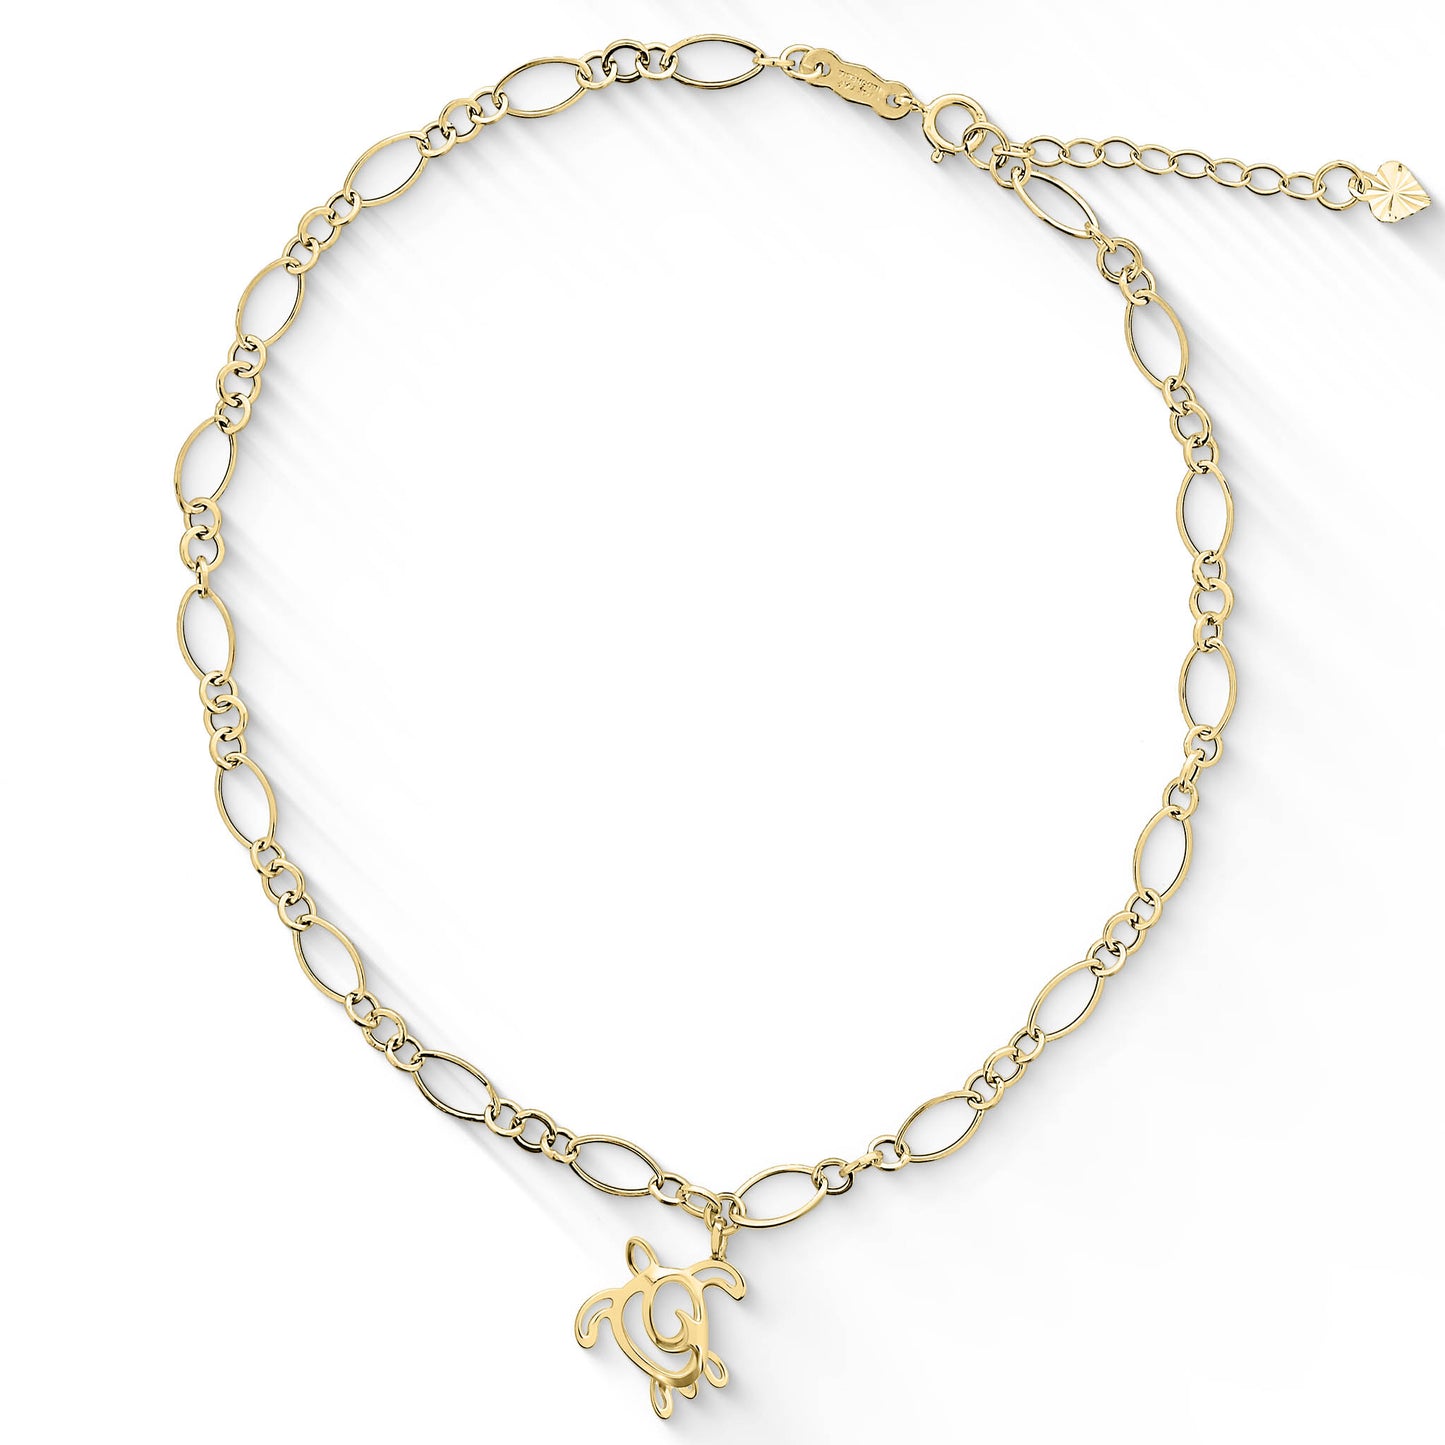 10938 - 14K Yellow Gold - Honu Charm Anklet